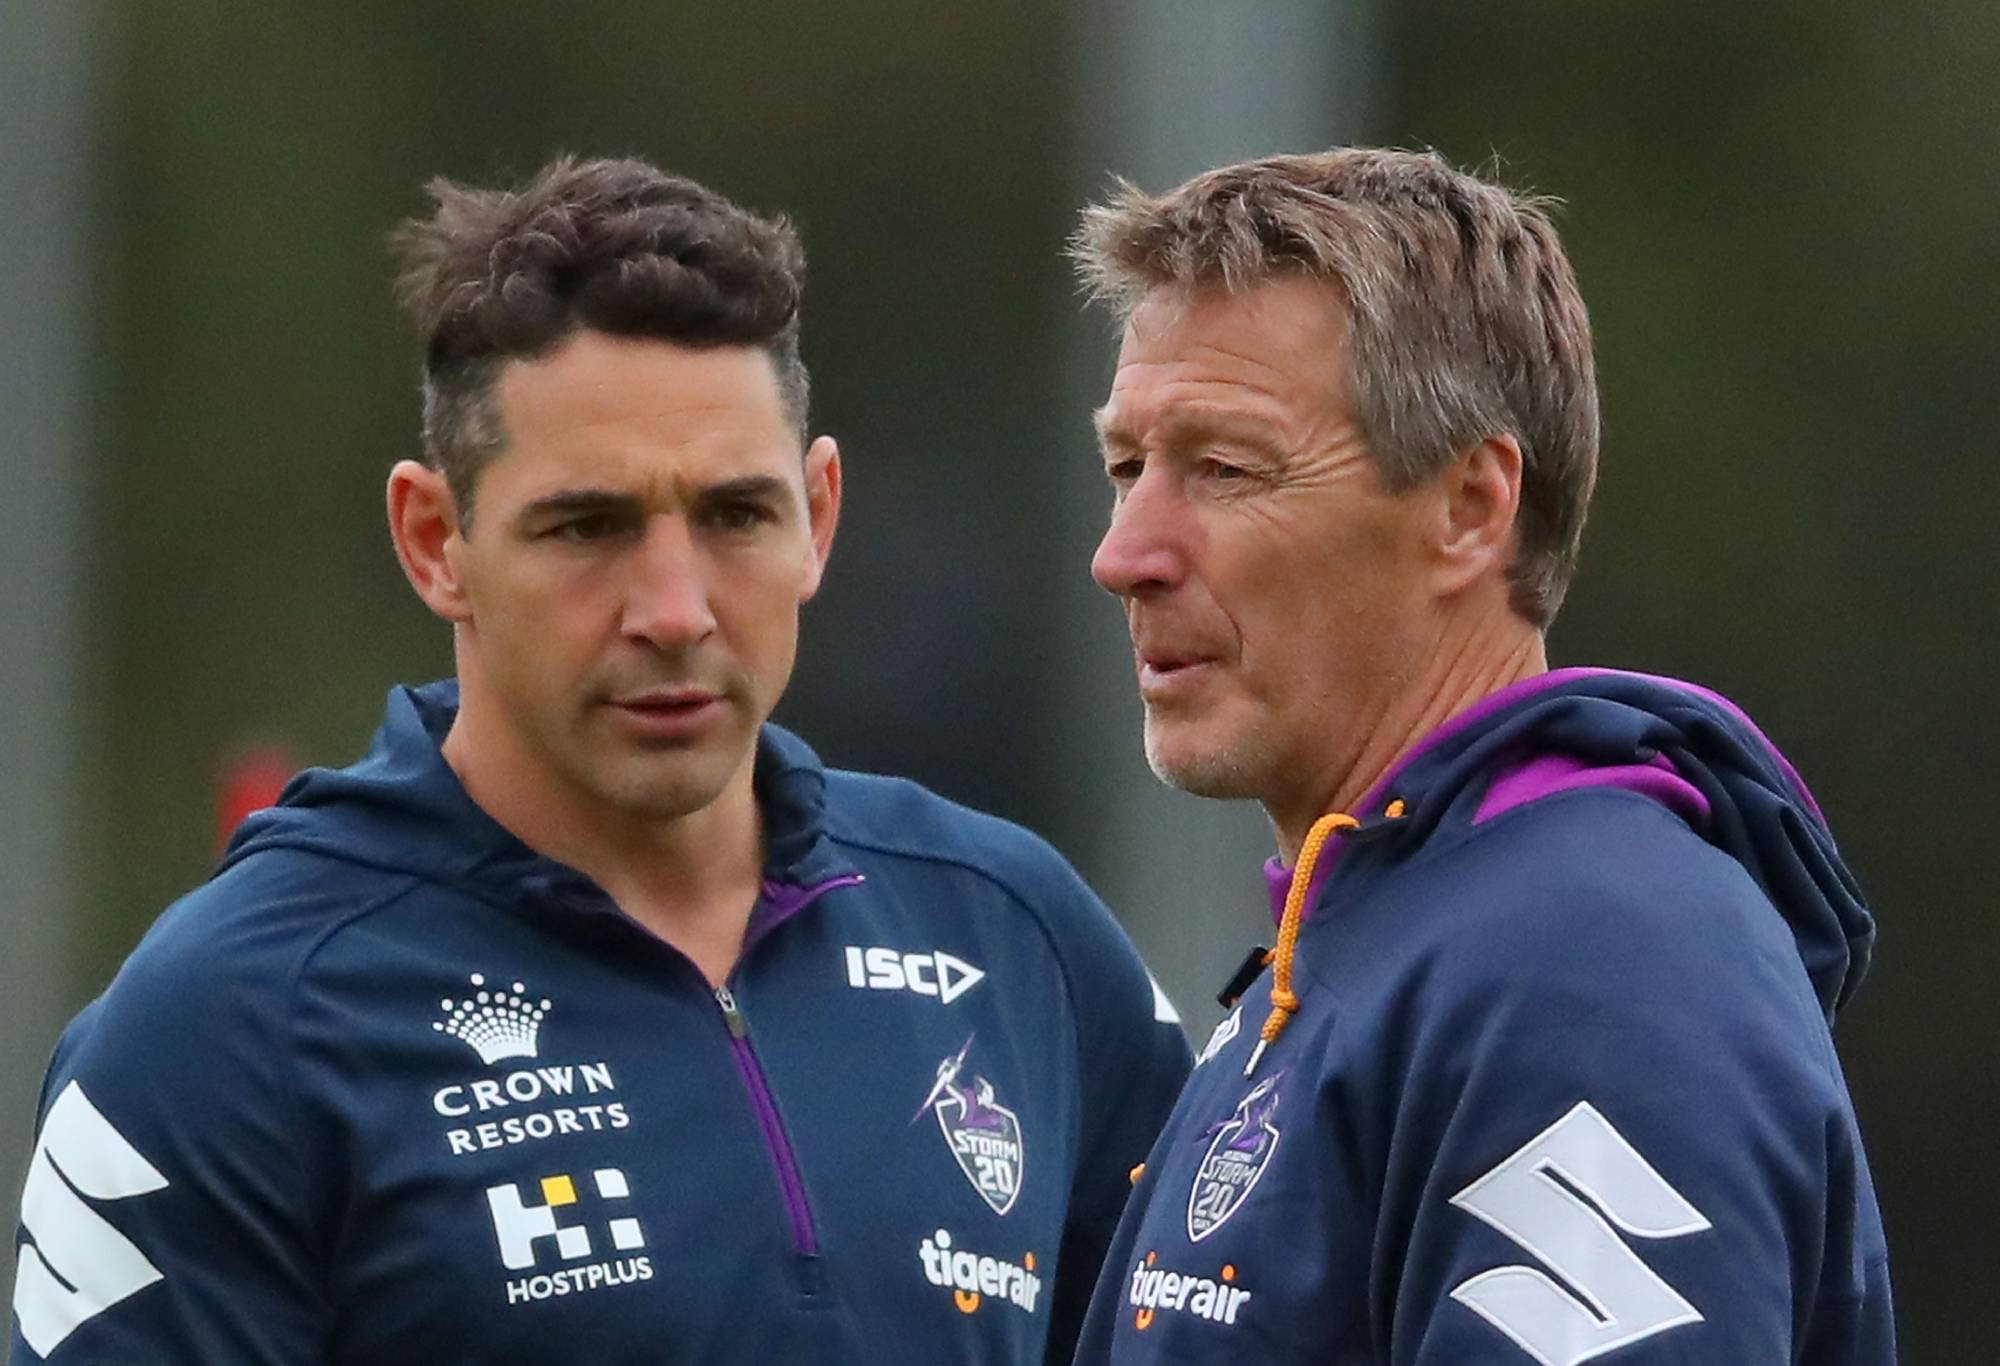 MELBOURNE, AUSTRALIA - MAY 16: Billy Slater of the Melbourne Storm and Storm coach Craig Bellamy talk during a Melbourne Storm NRL media session at Gosch's Paddock on May 16, 2018 in Melbourne, Australia. (Photo by Scott Barbour/Getty Images)